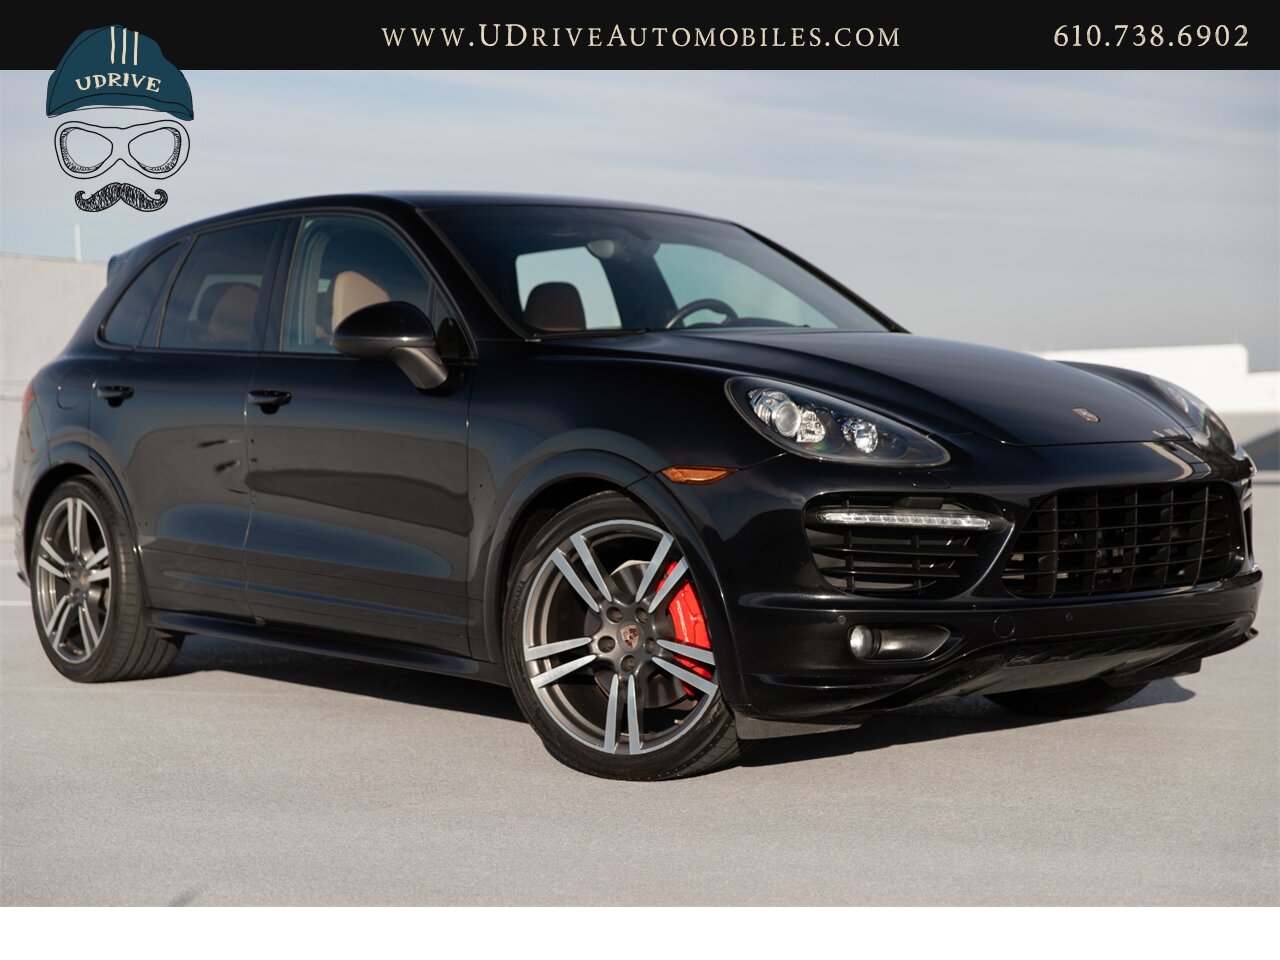 2013 Porsche Cayenne GTS Service History 1 Owner 21in Wheels  Espresso / Cognac Two Tone Leather - Photo 4 - West Chester, PA 19382